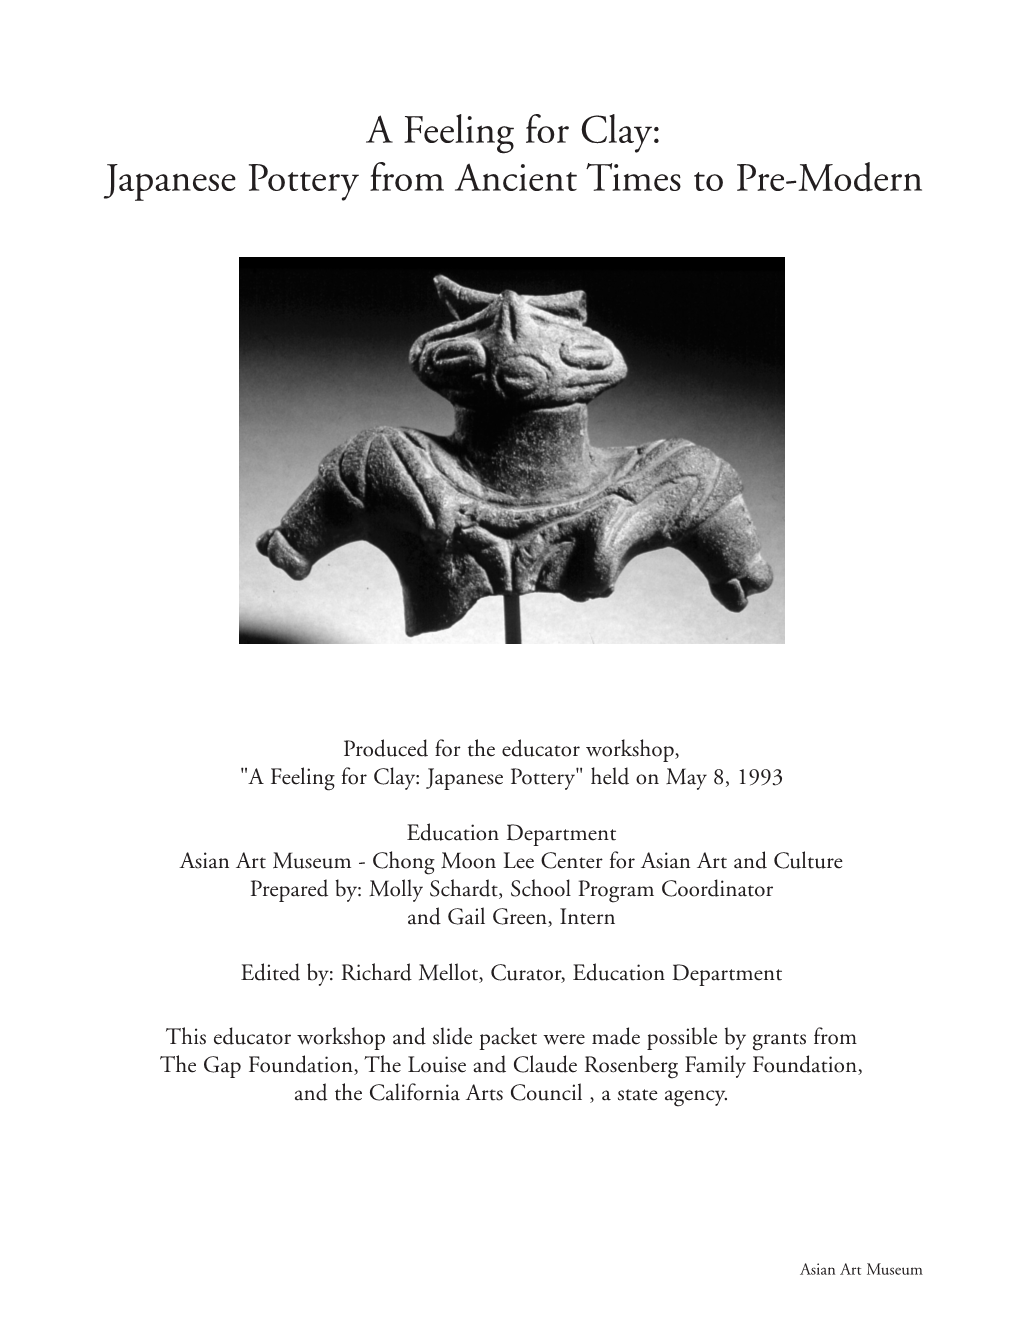 A Feeling for Clay: Japanese Pottery from Ancient Times to Pre-Modern